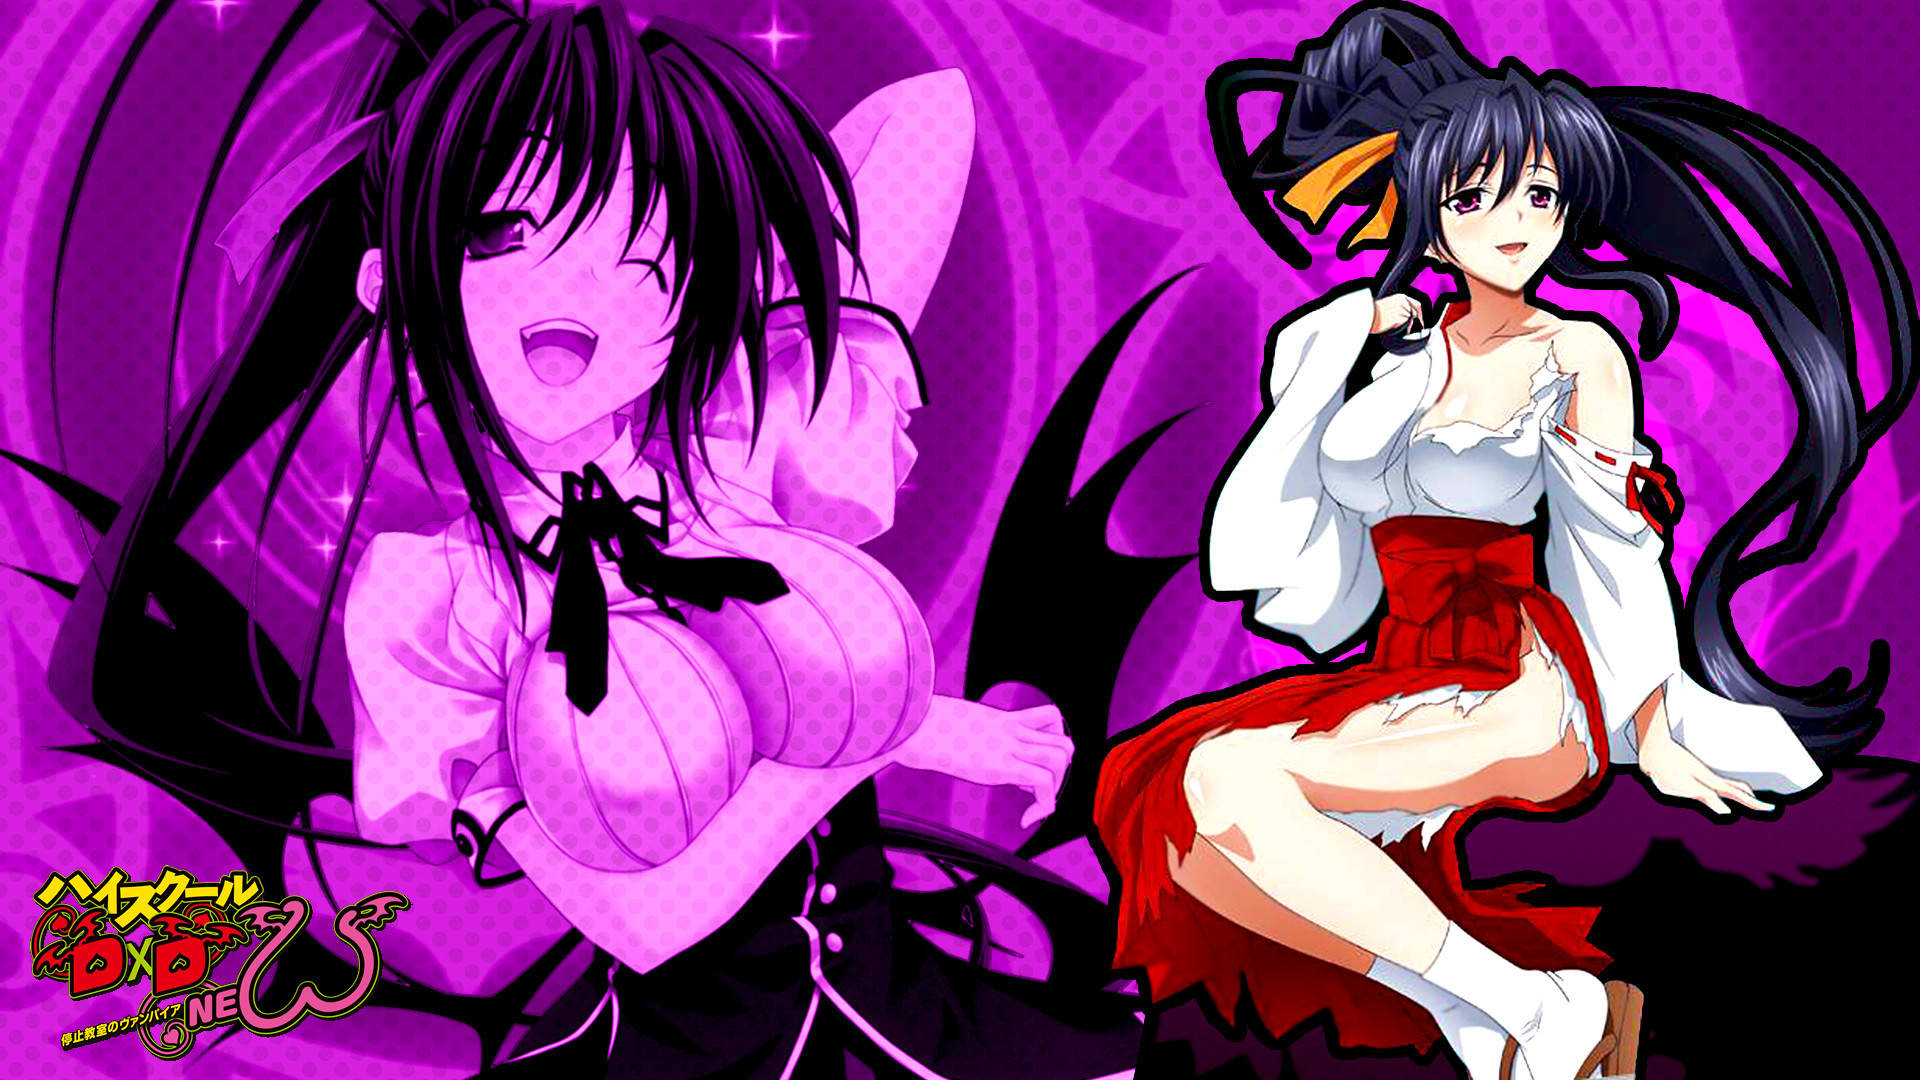 Look out, here comes Akeno Himejima from High School DxD! Wallpaper